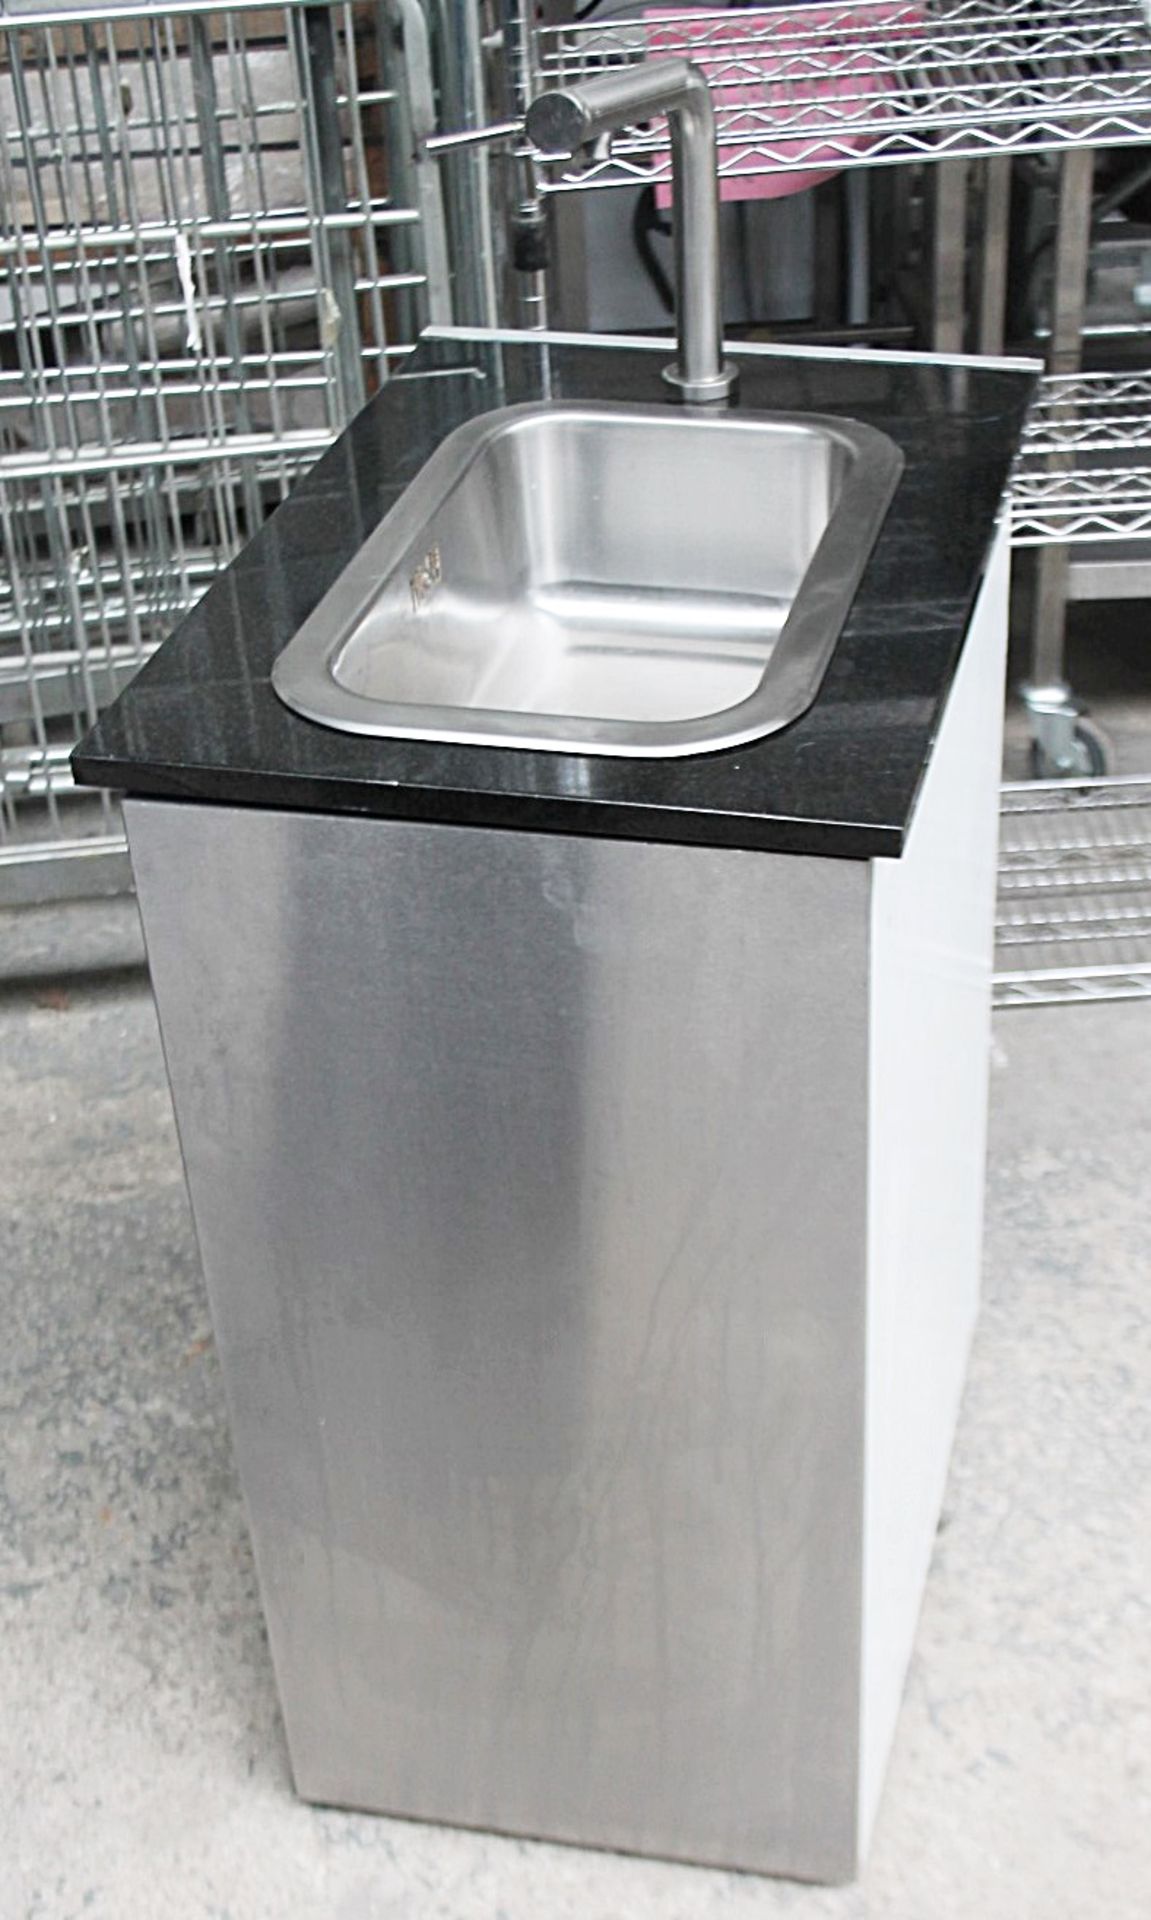 1 x Marble Topped Sink Unit Wash Station - Recently Removed From A Boutique Hair Salon - Ref: - Image 5 of 7